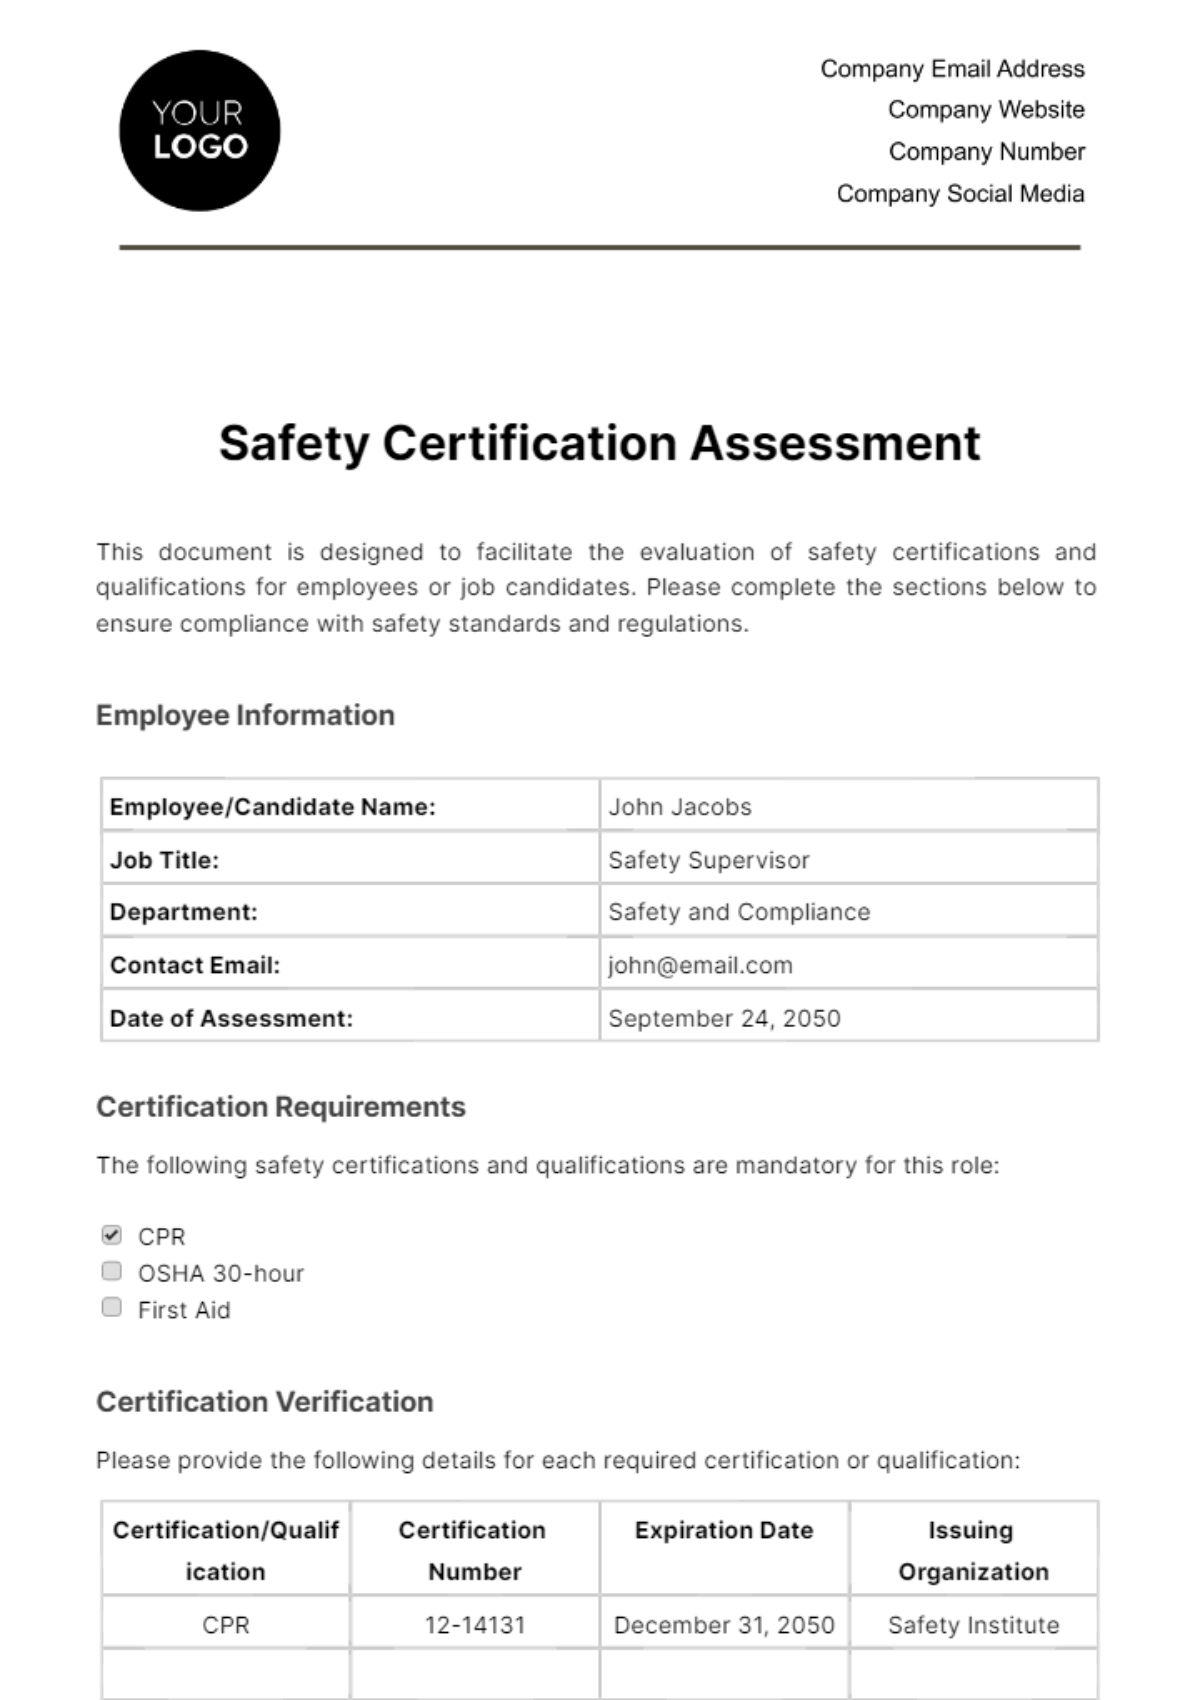 Safety Certification Assessment HR Template